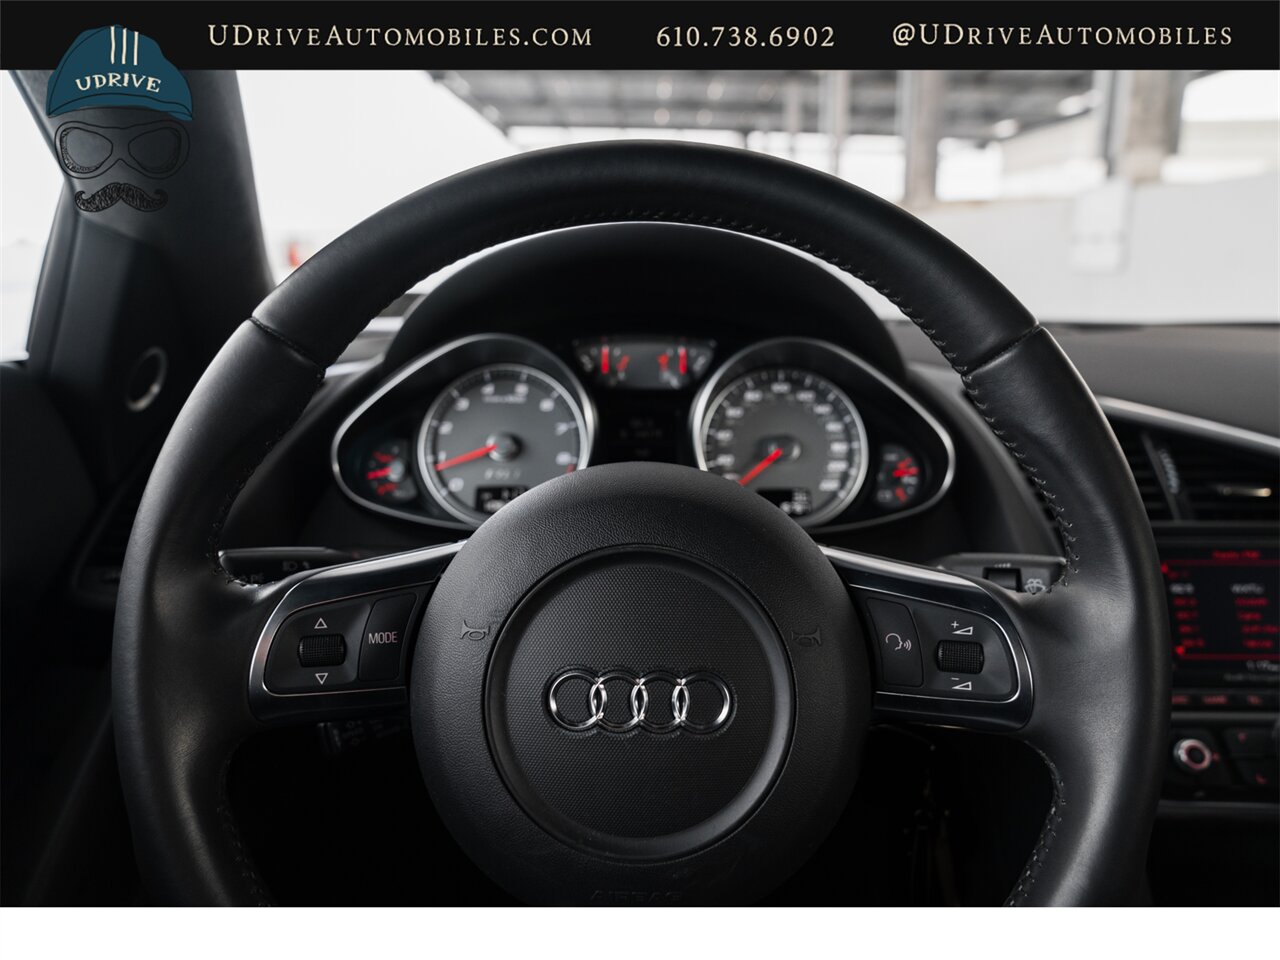 2009 Audi R8 Quattro  4.2 V8 6 Speed Manual 15k Miles - Photo 34 - West Chester, PA 19382